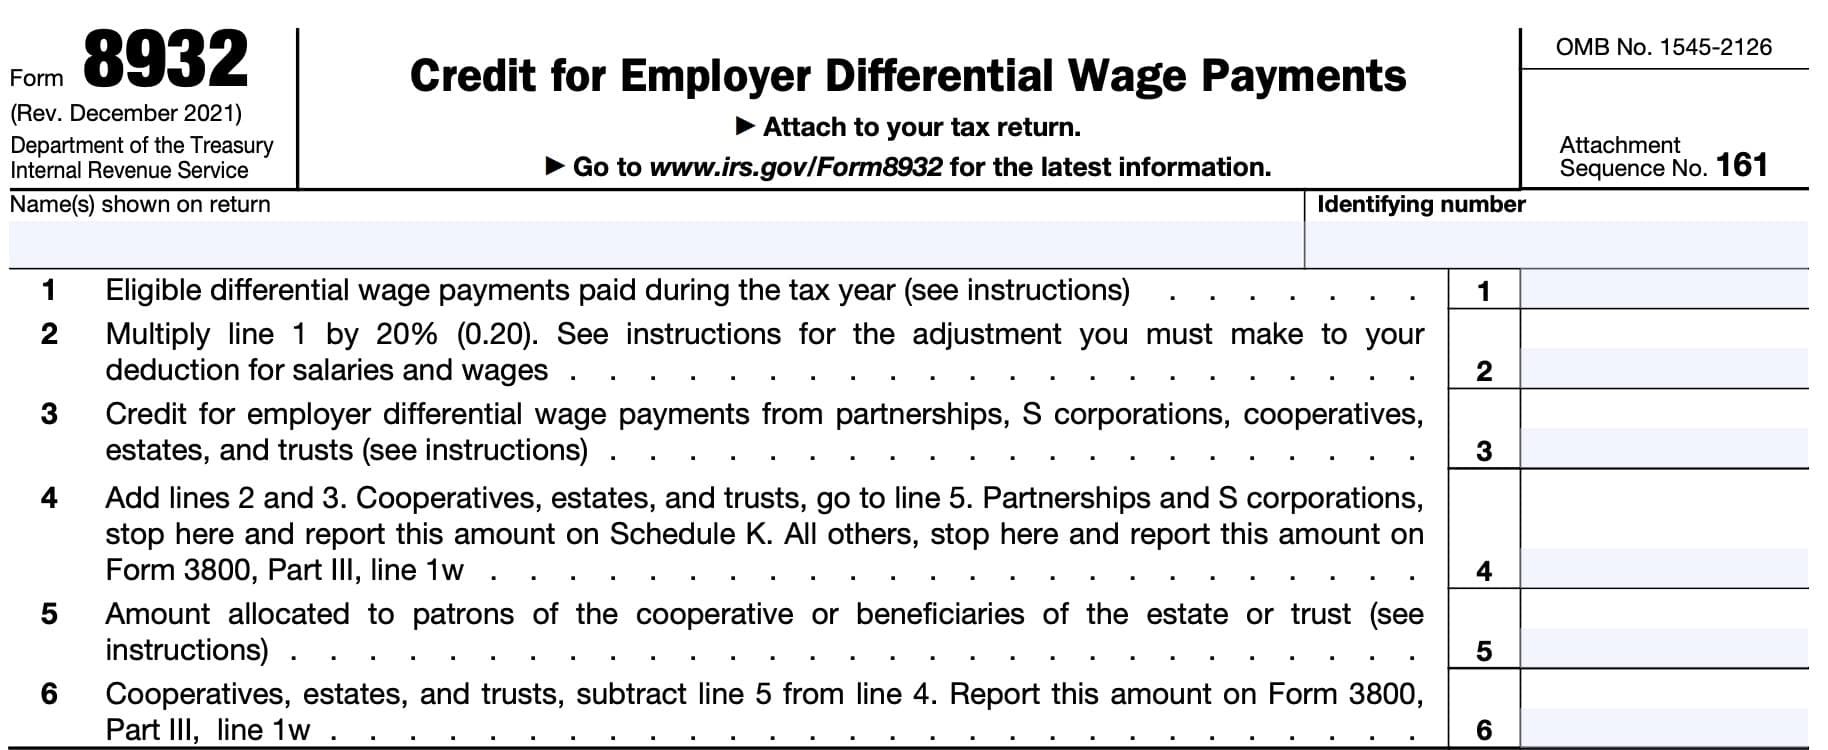 irs form 8932, credit for employer differential wage payments